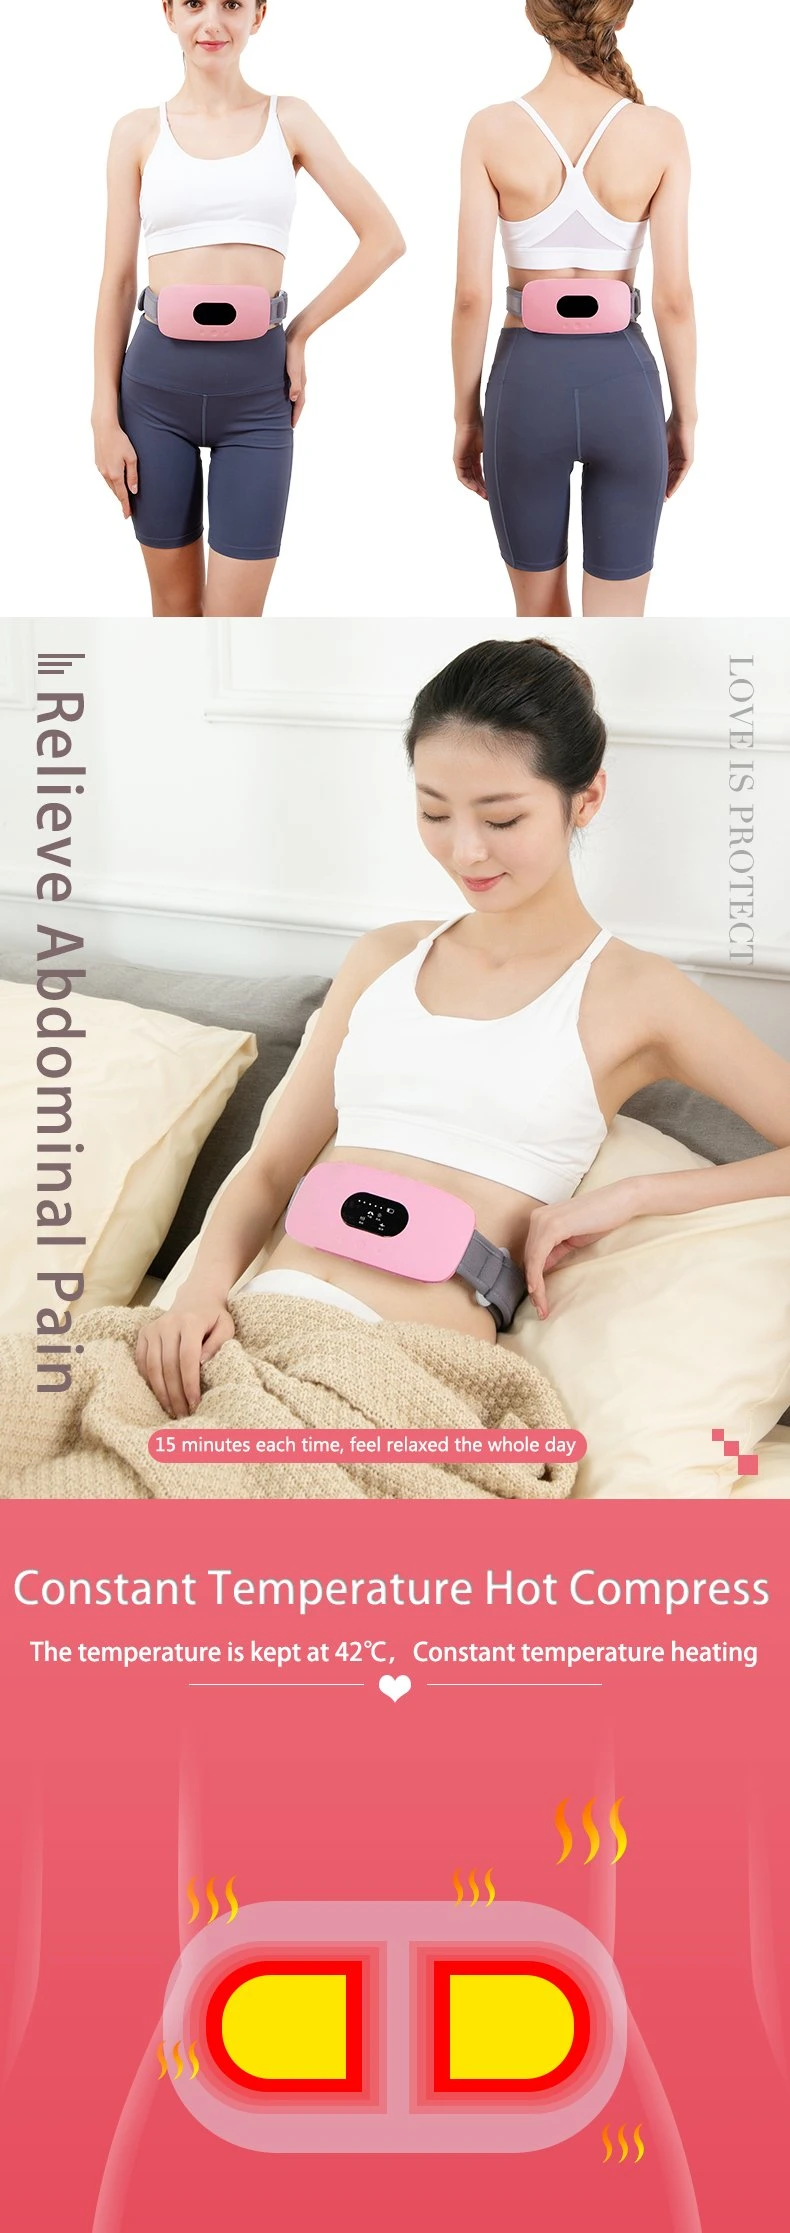 China Supplier Infrared Heating Vibrating Belt Warm Moxibustion Abdominal Massager for Stomach Ach Relief